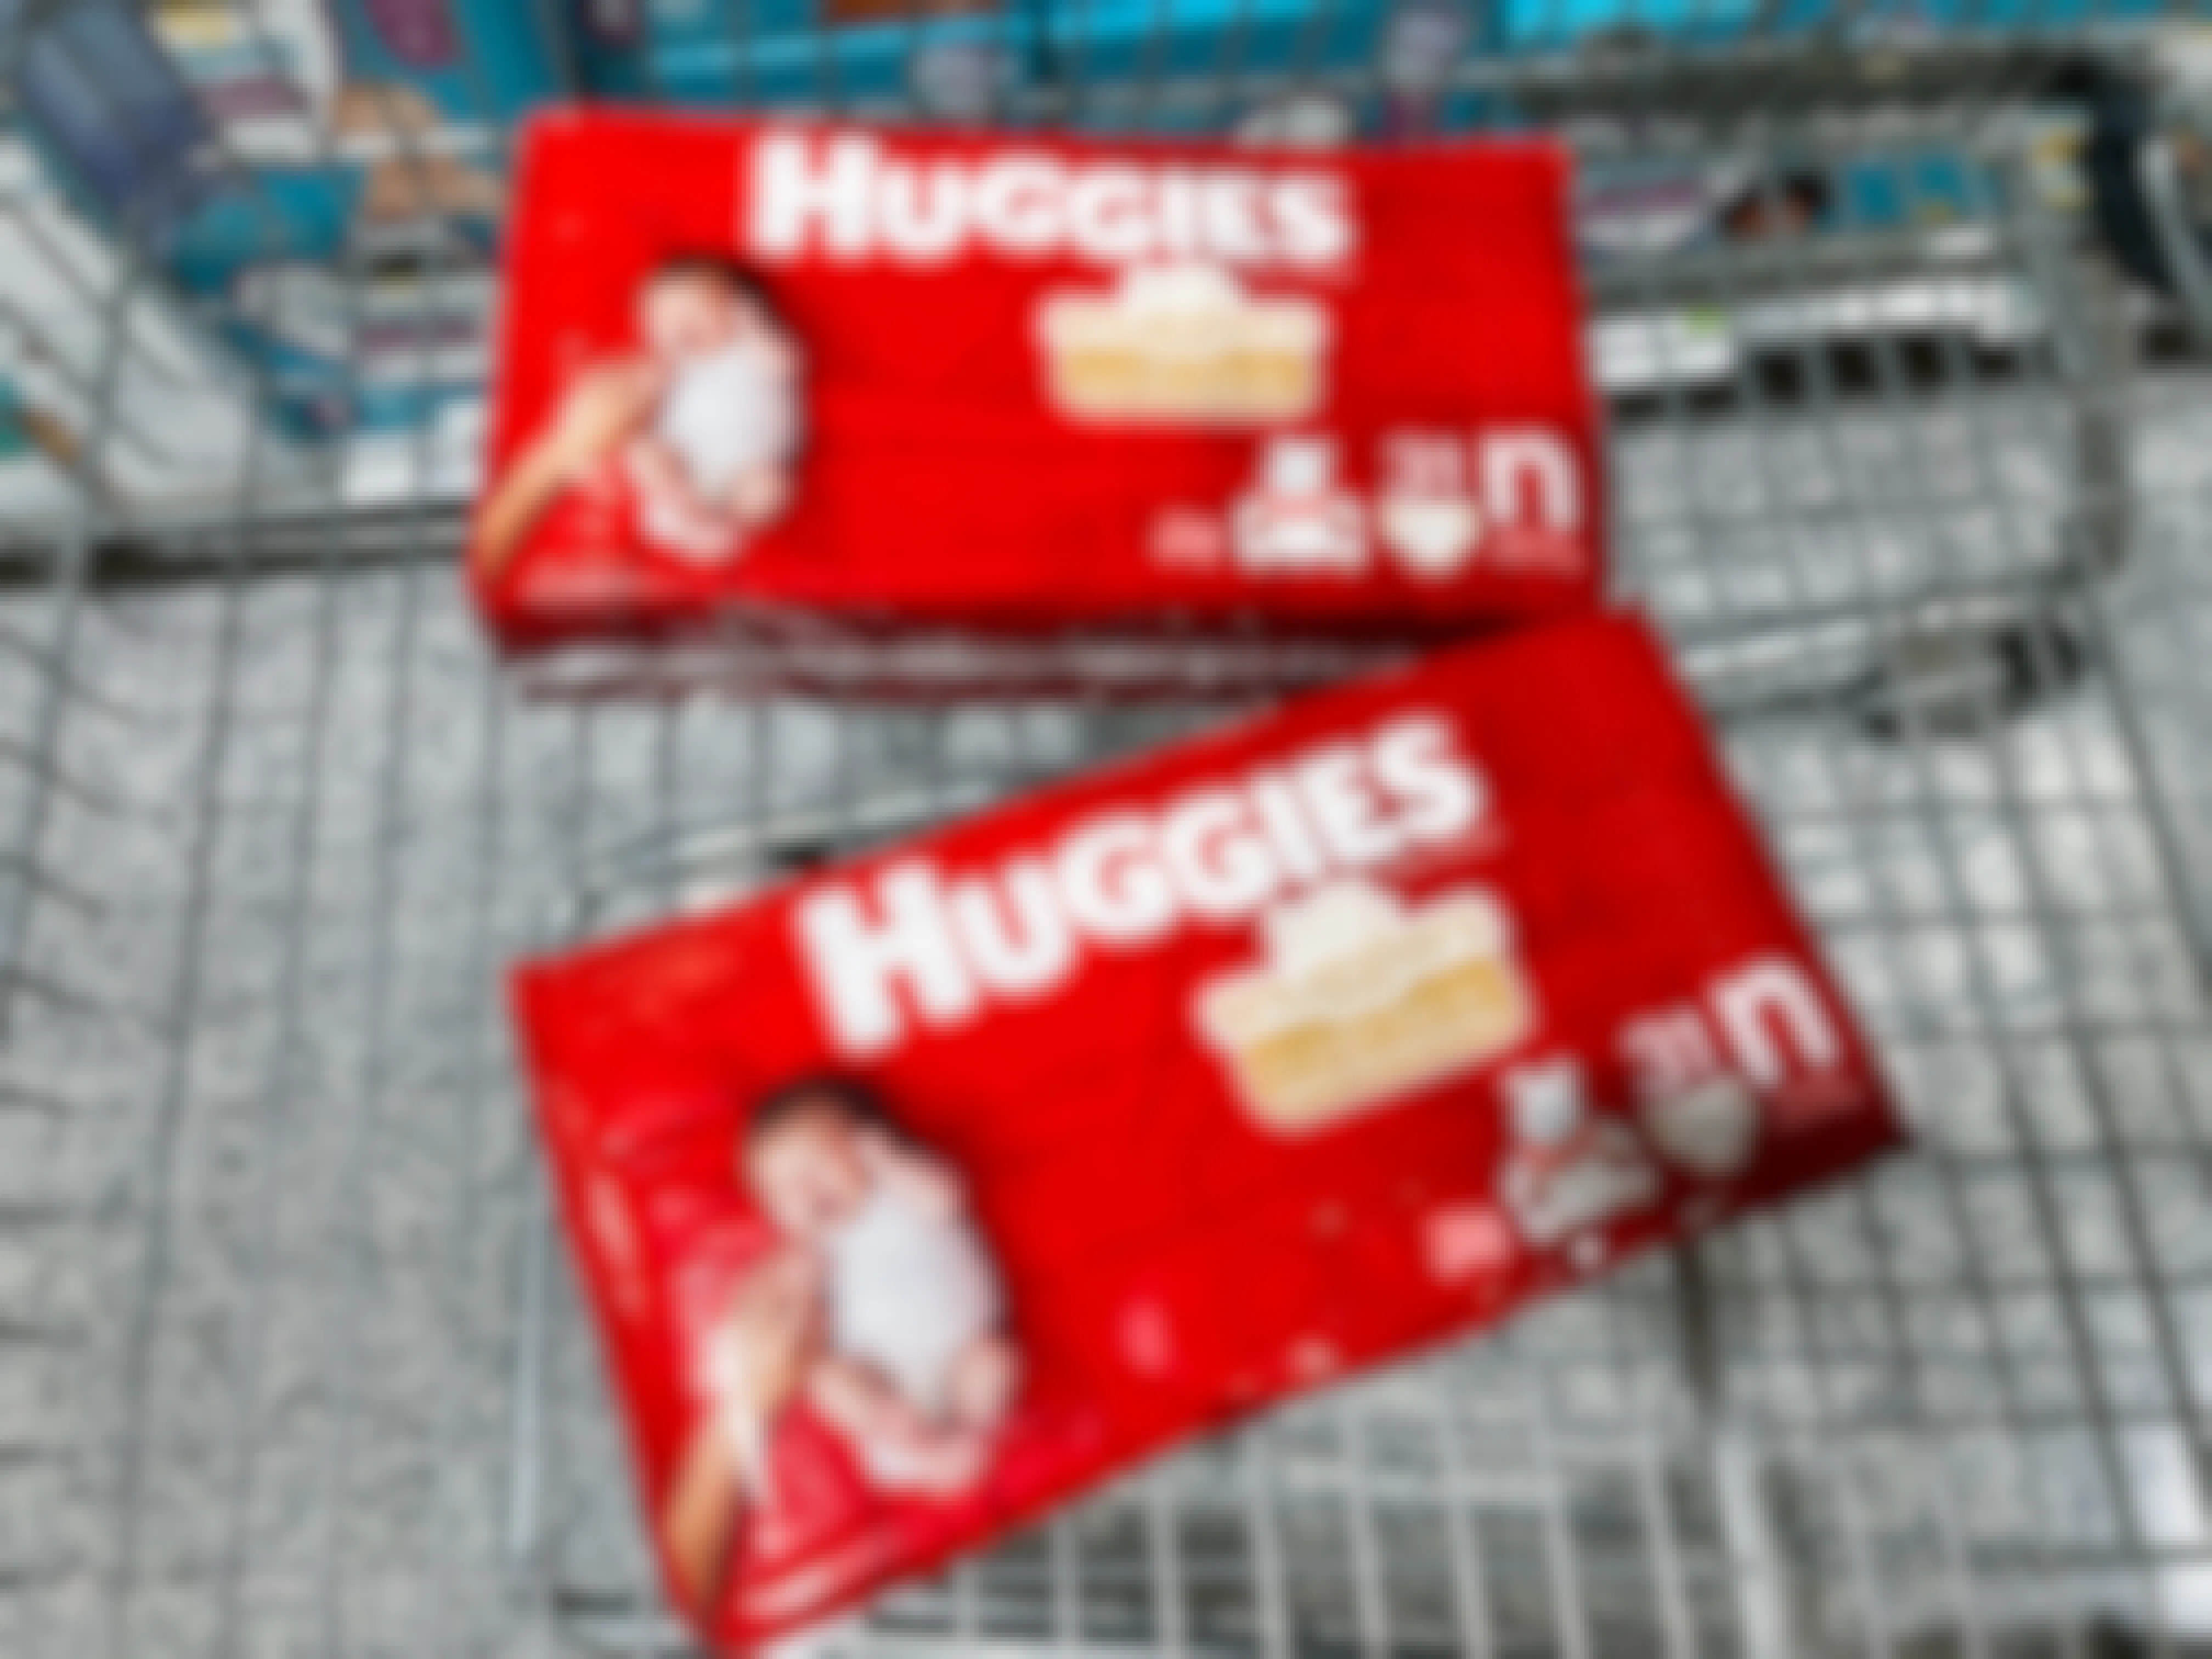 Two packs of newborn Huggies diapers in a grocery cart.